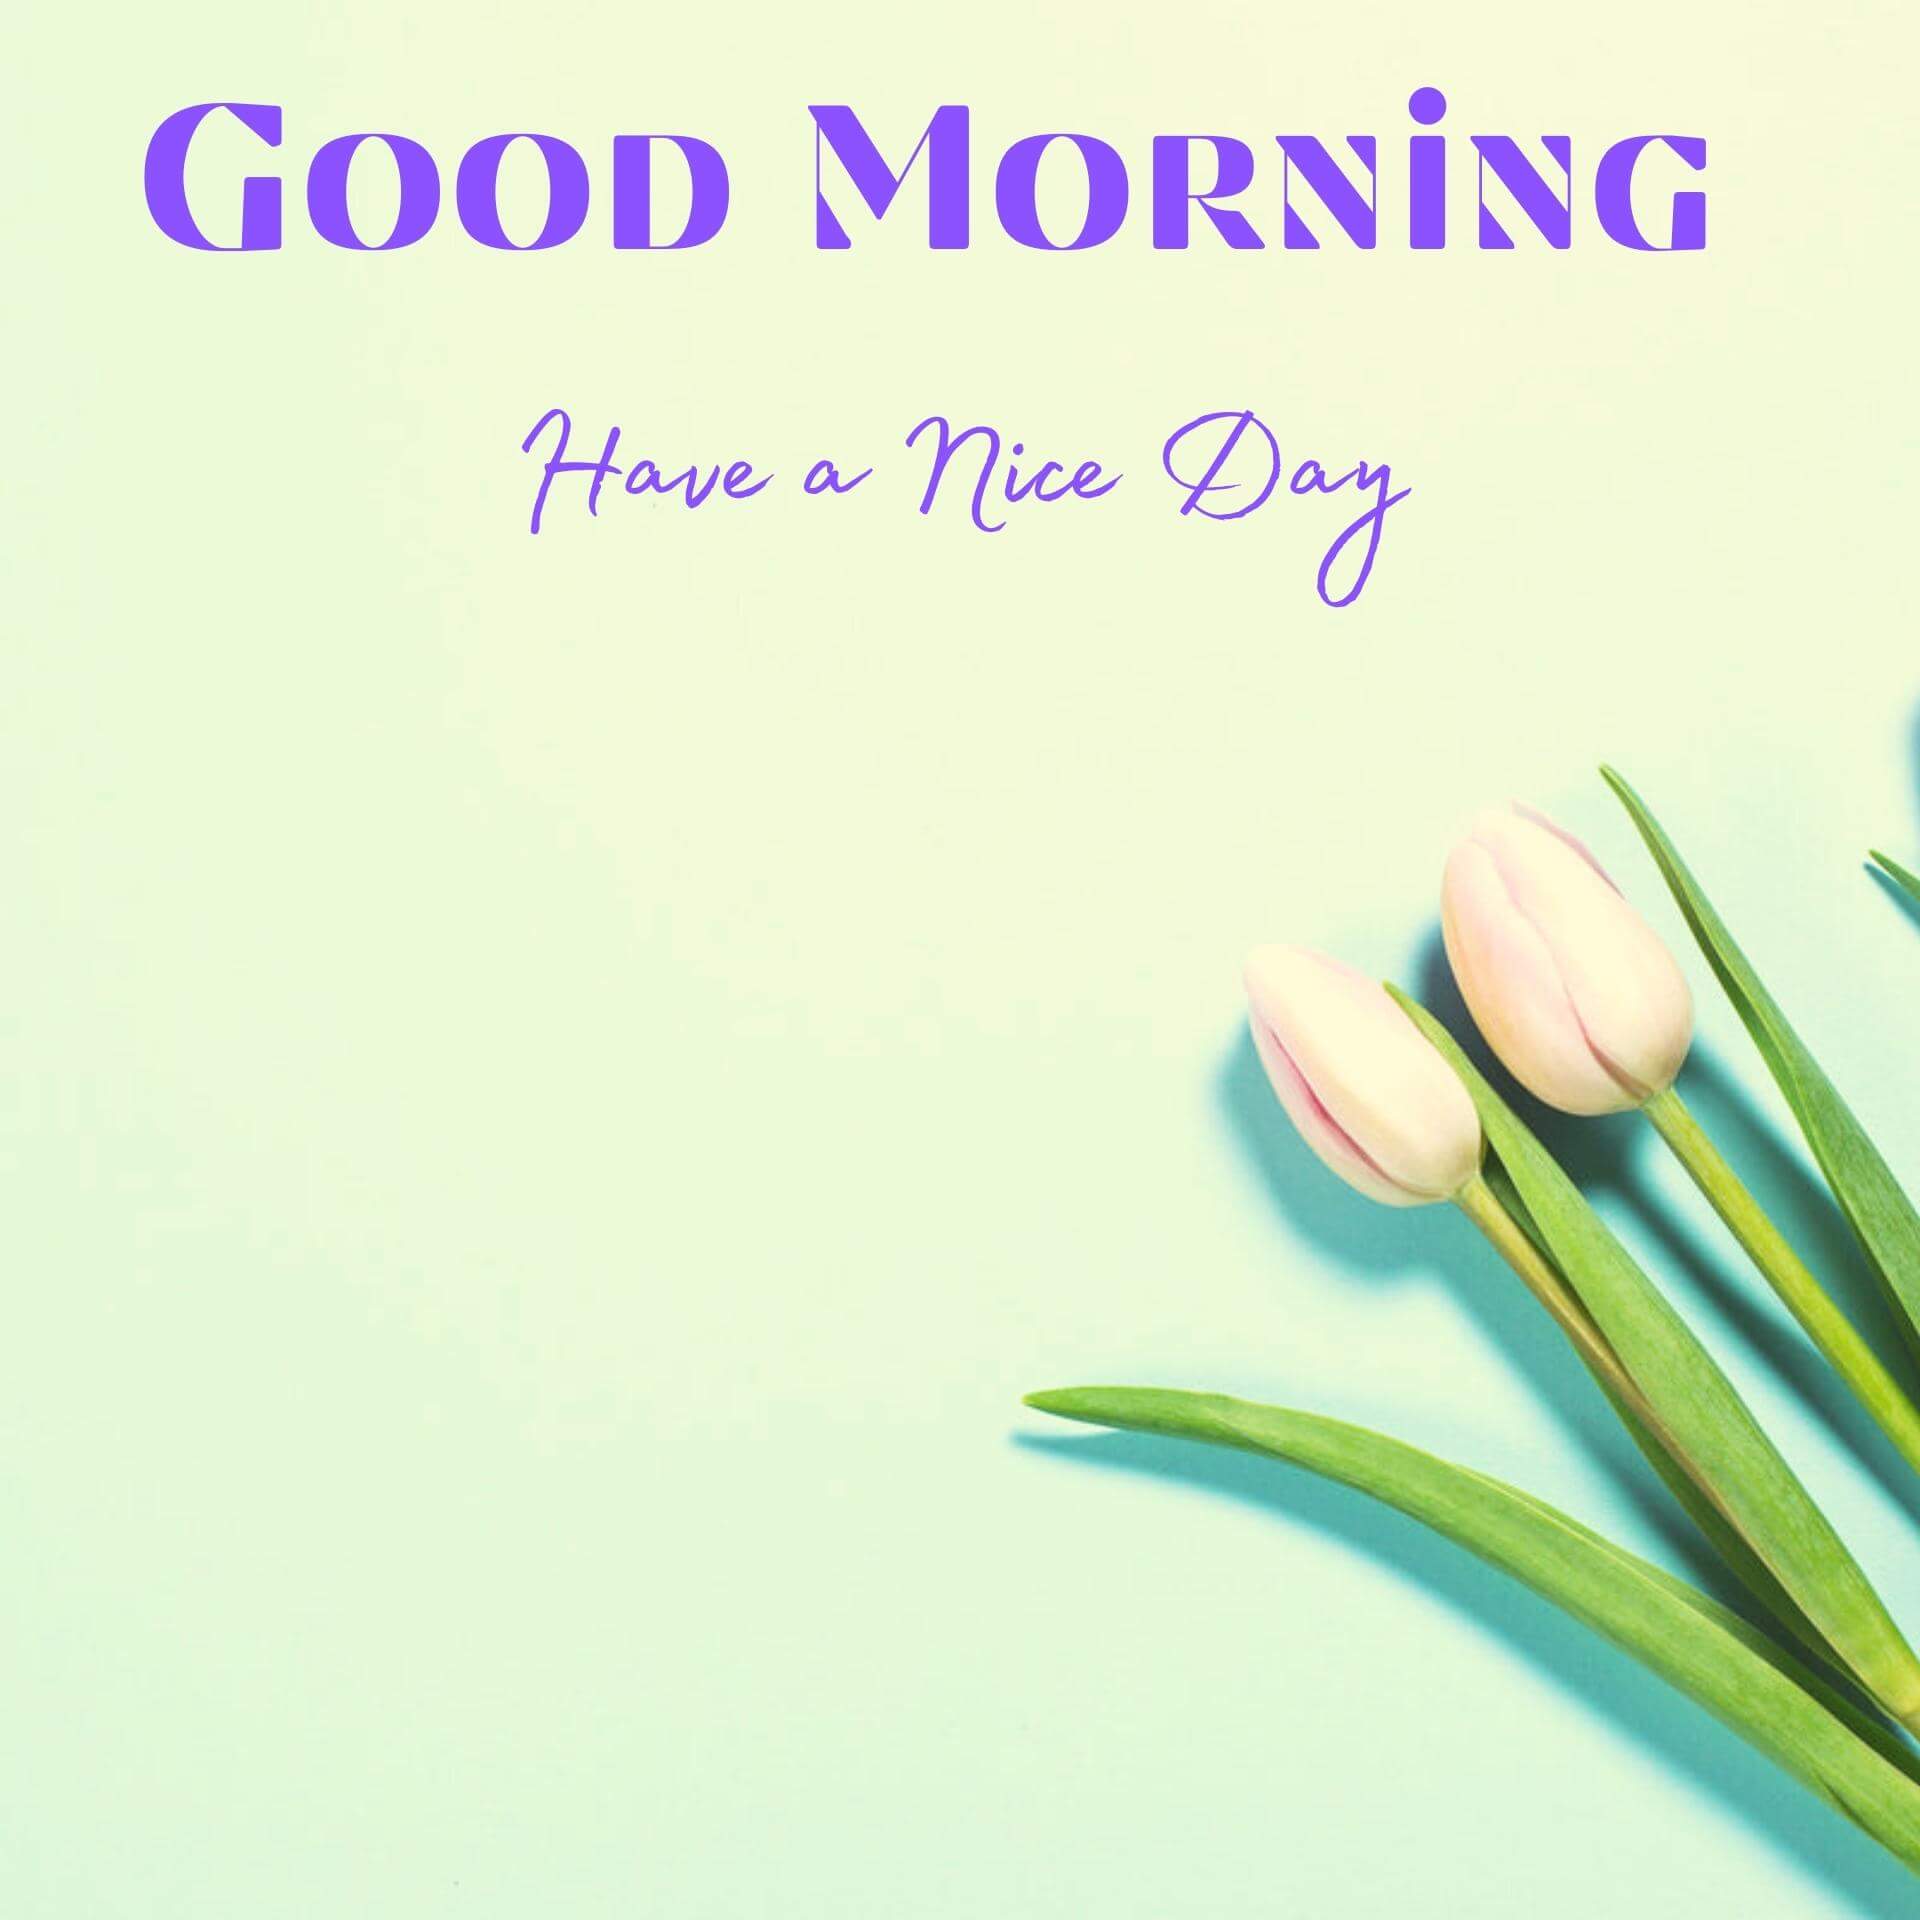 good morning message download